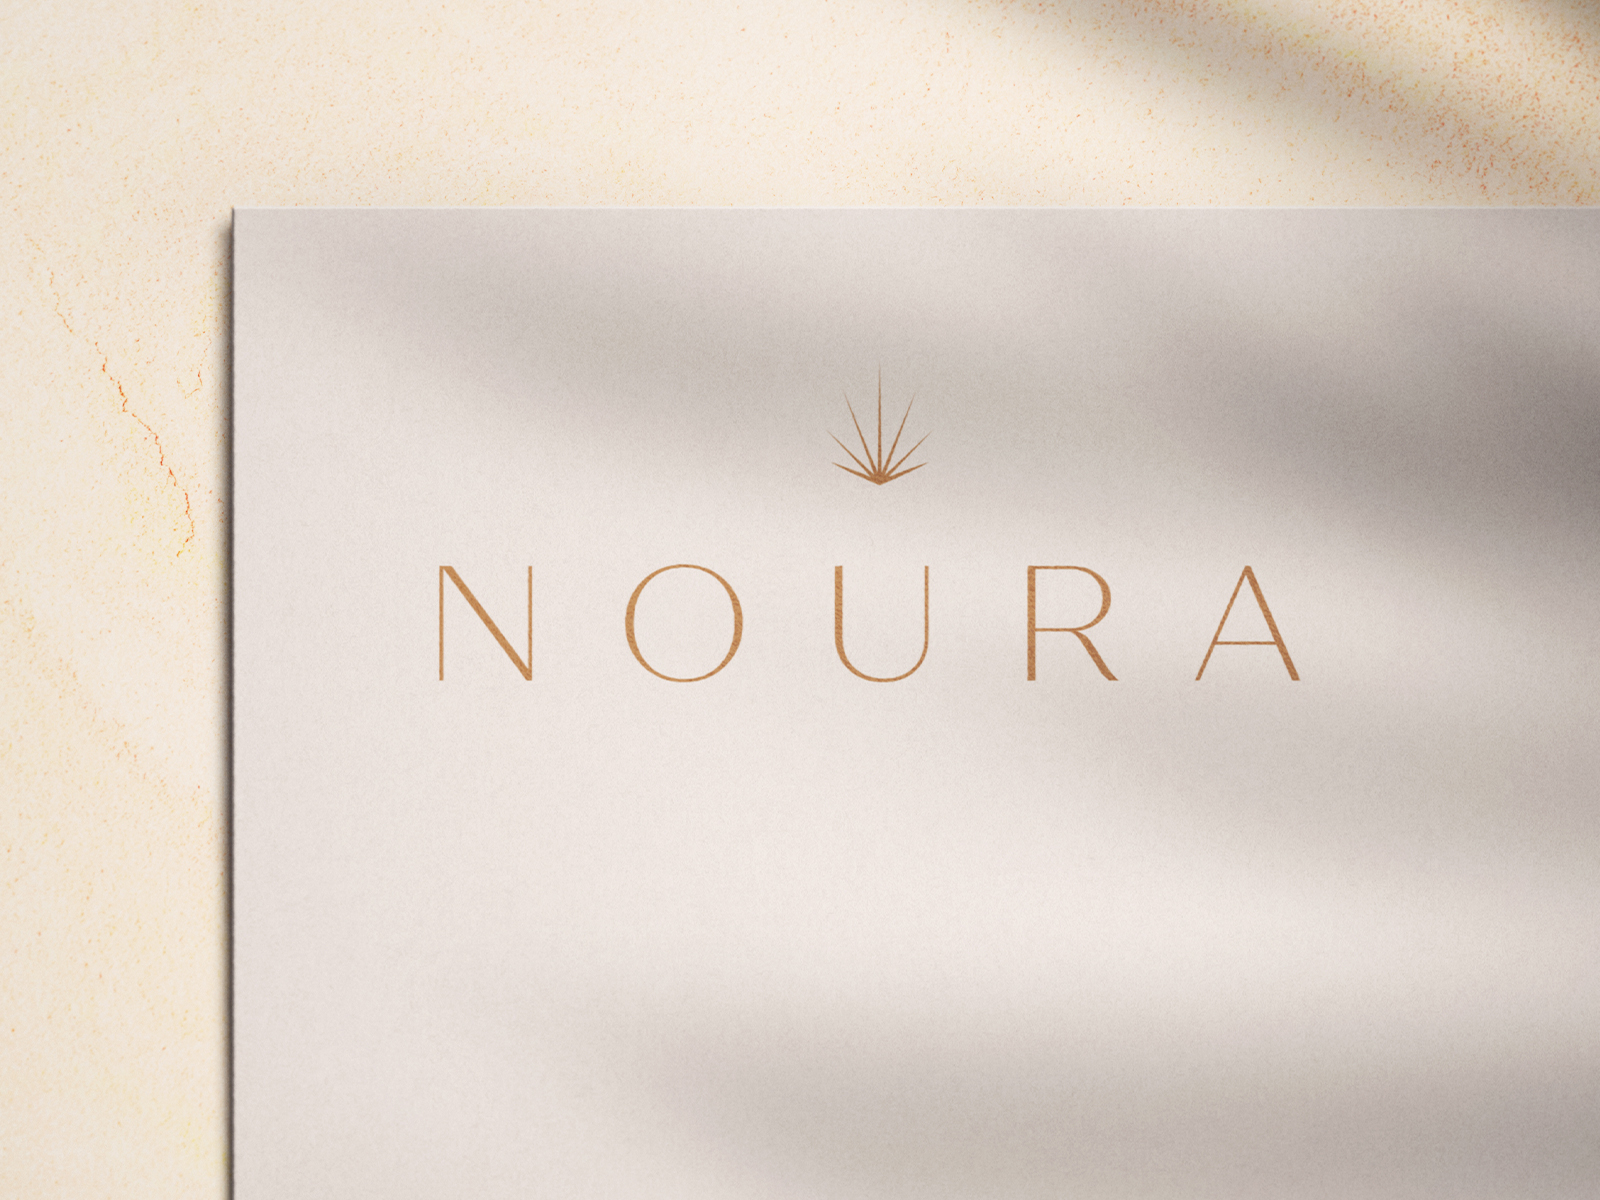 Download NOURA - 2nd Proposal by Muhammad Ali Effendy for ...